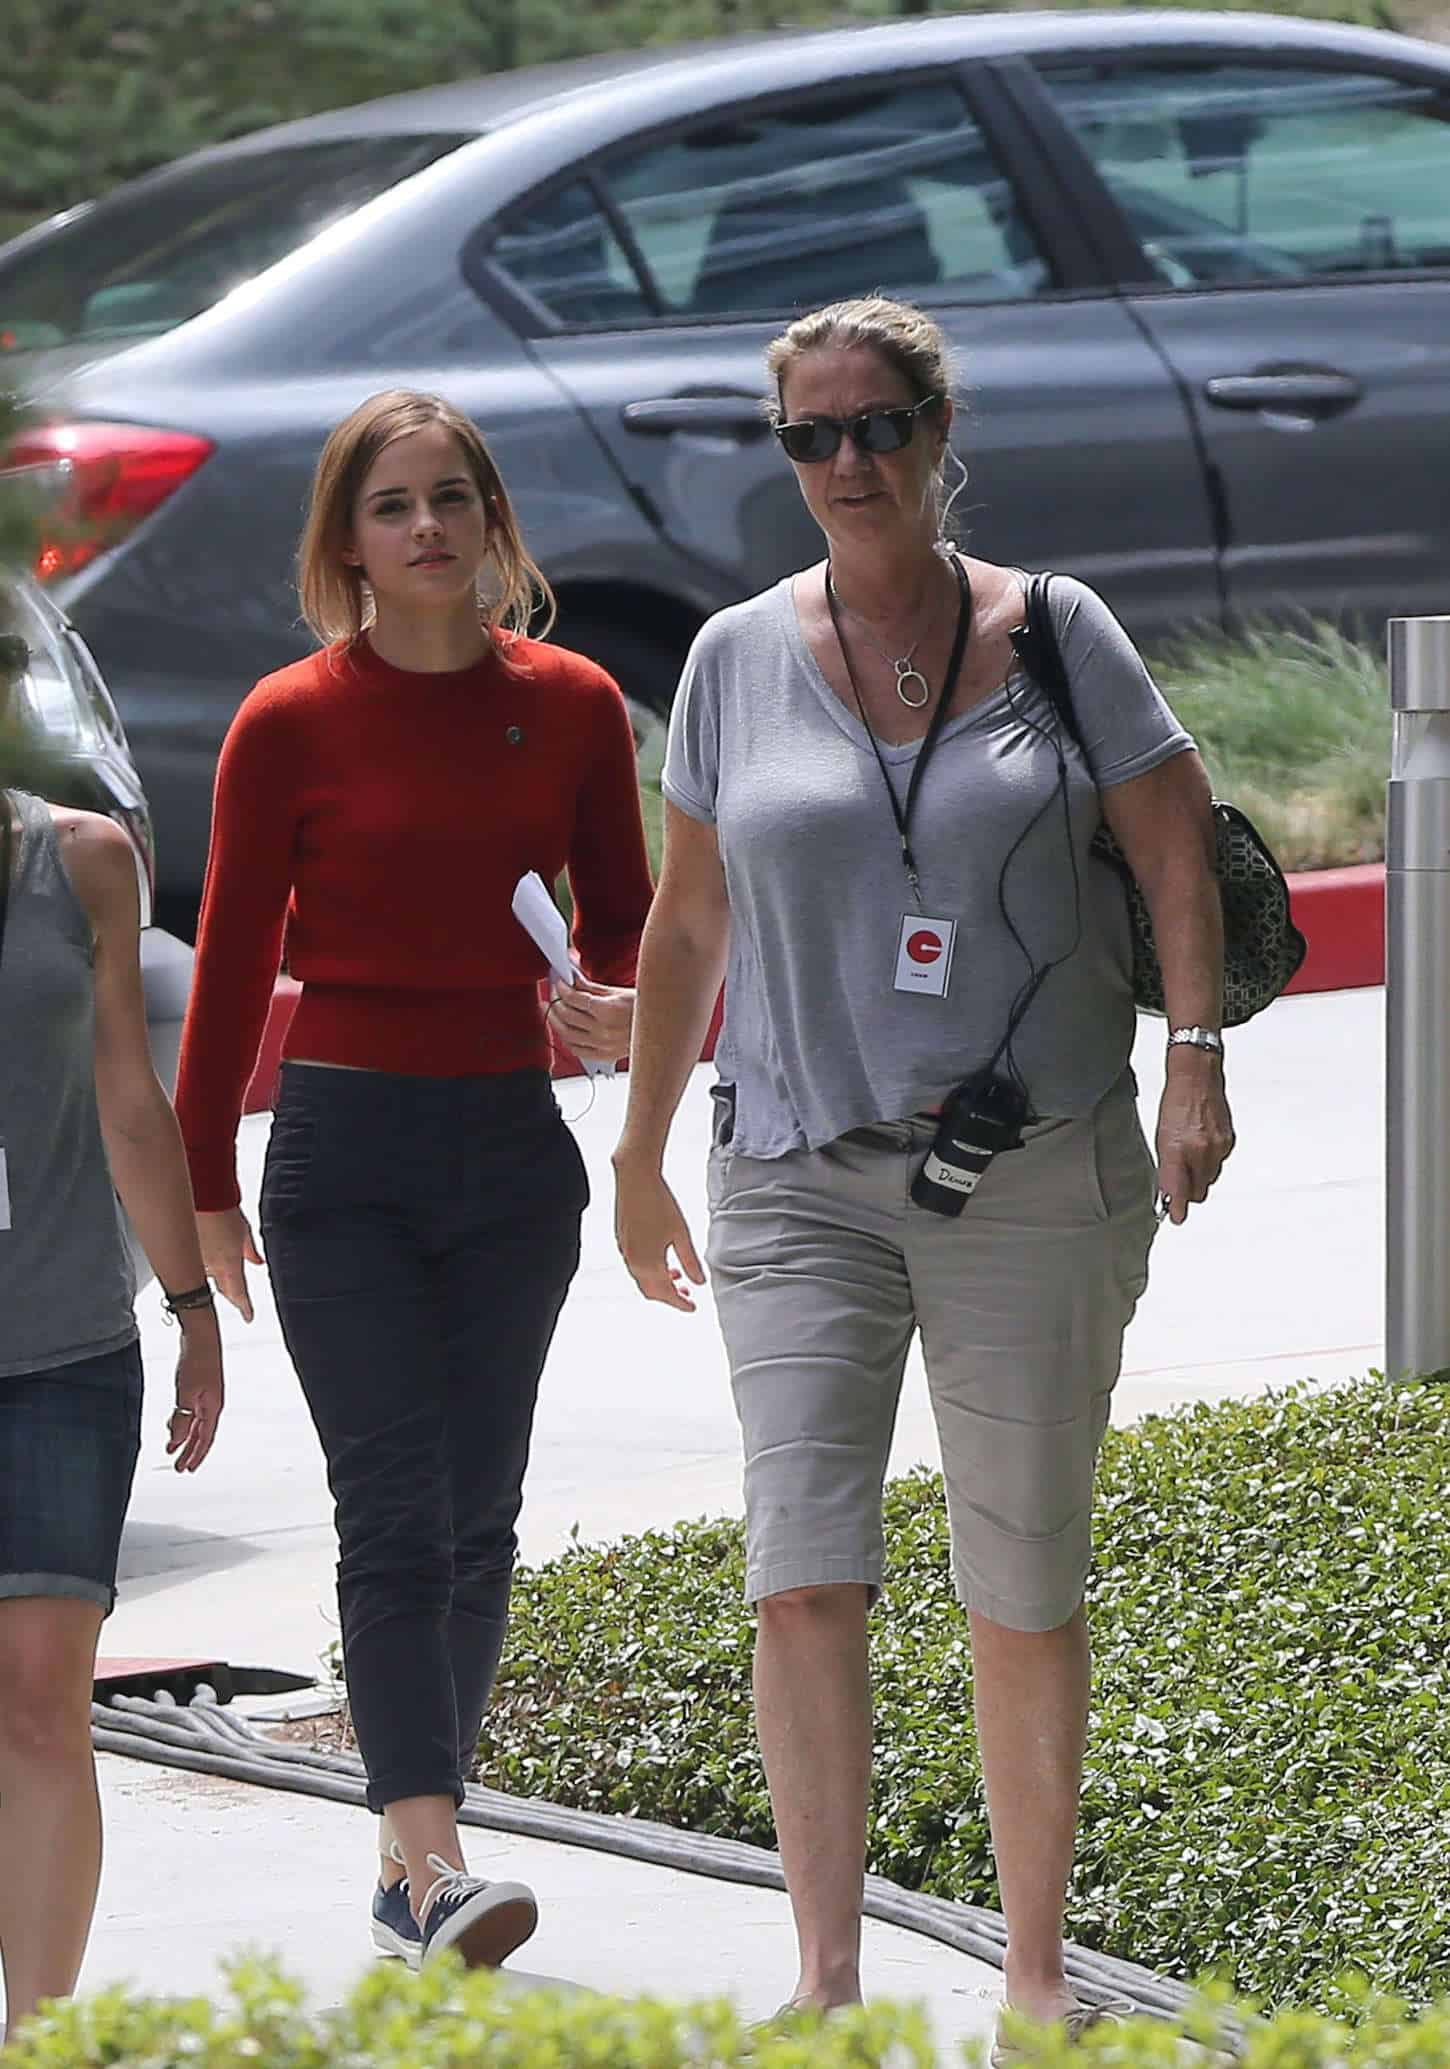 Emma Watson Looked Incredibly Beautiful on the Set of "The Circle" in LA